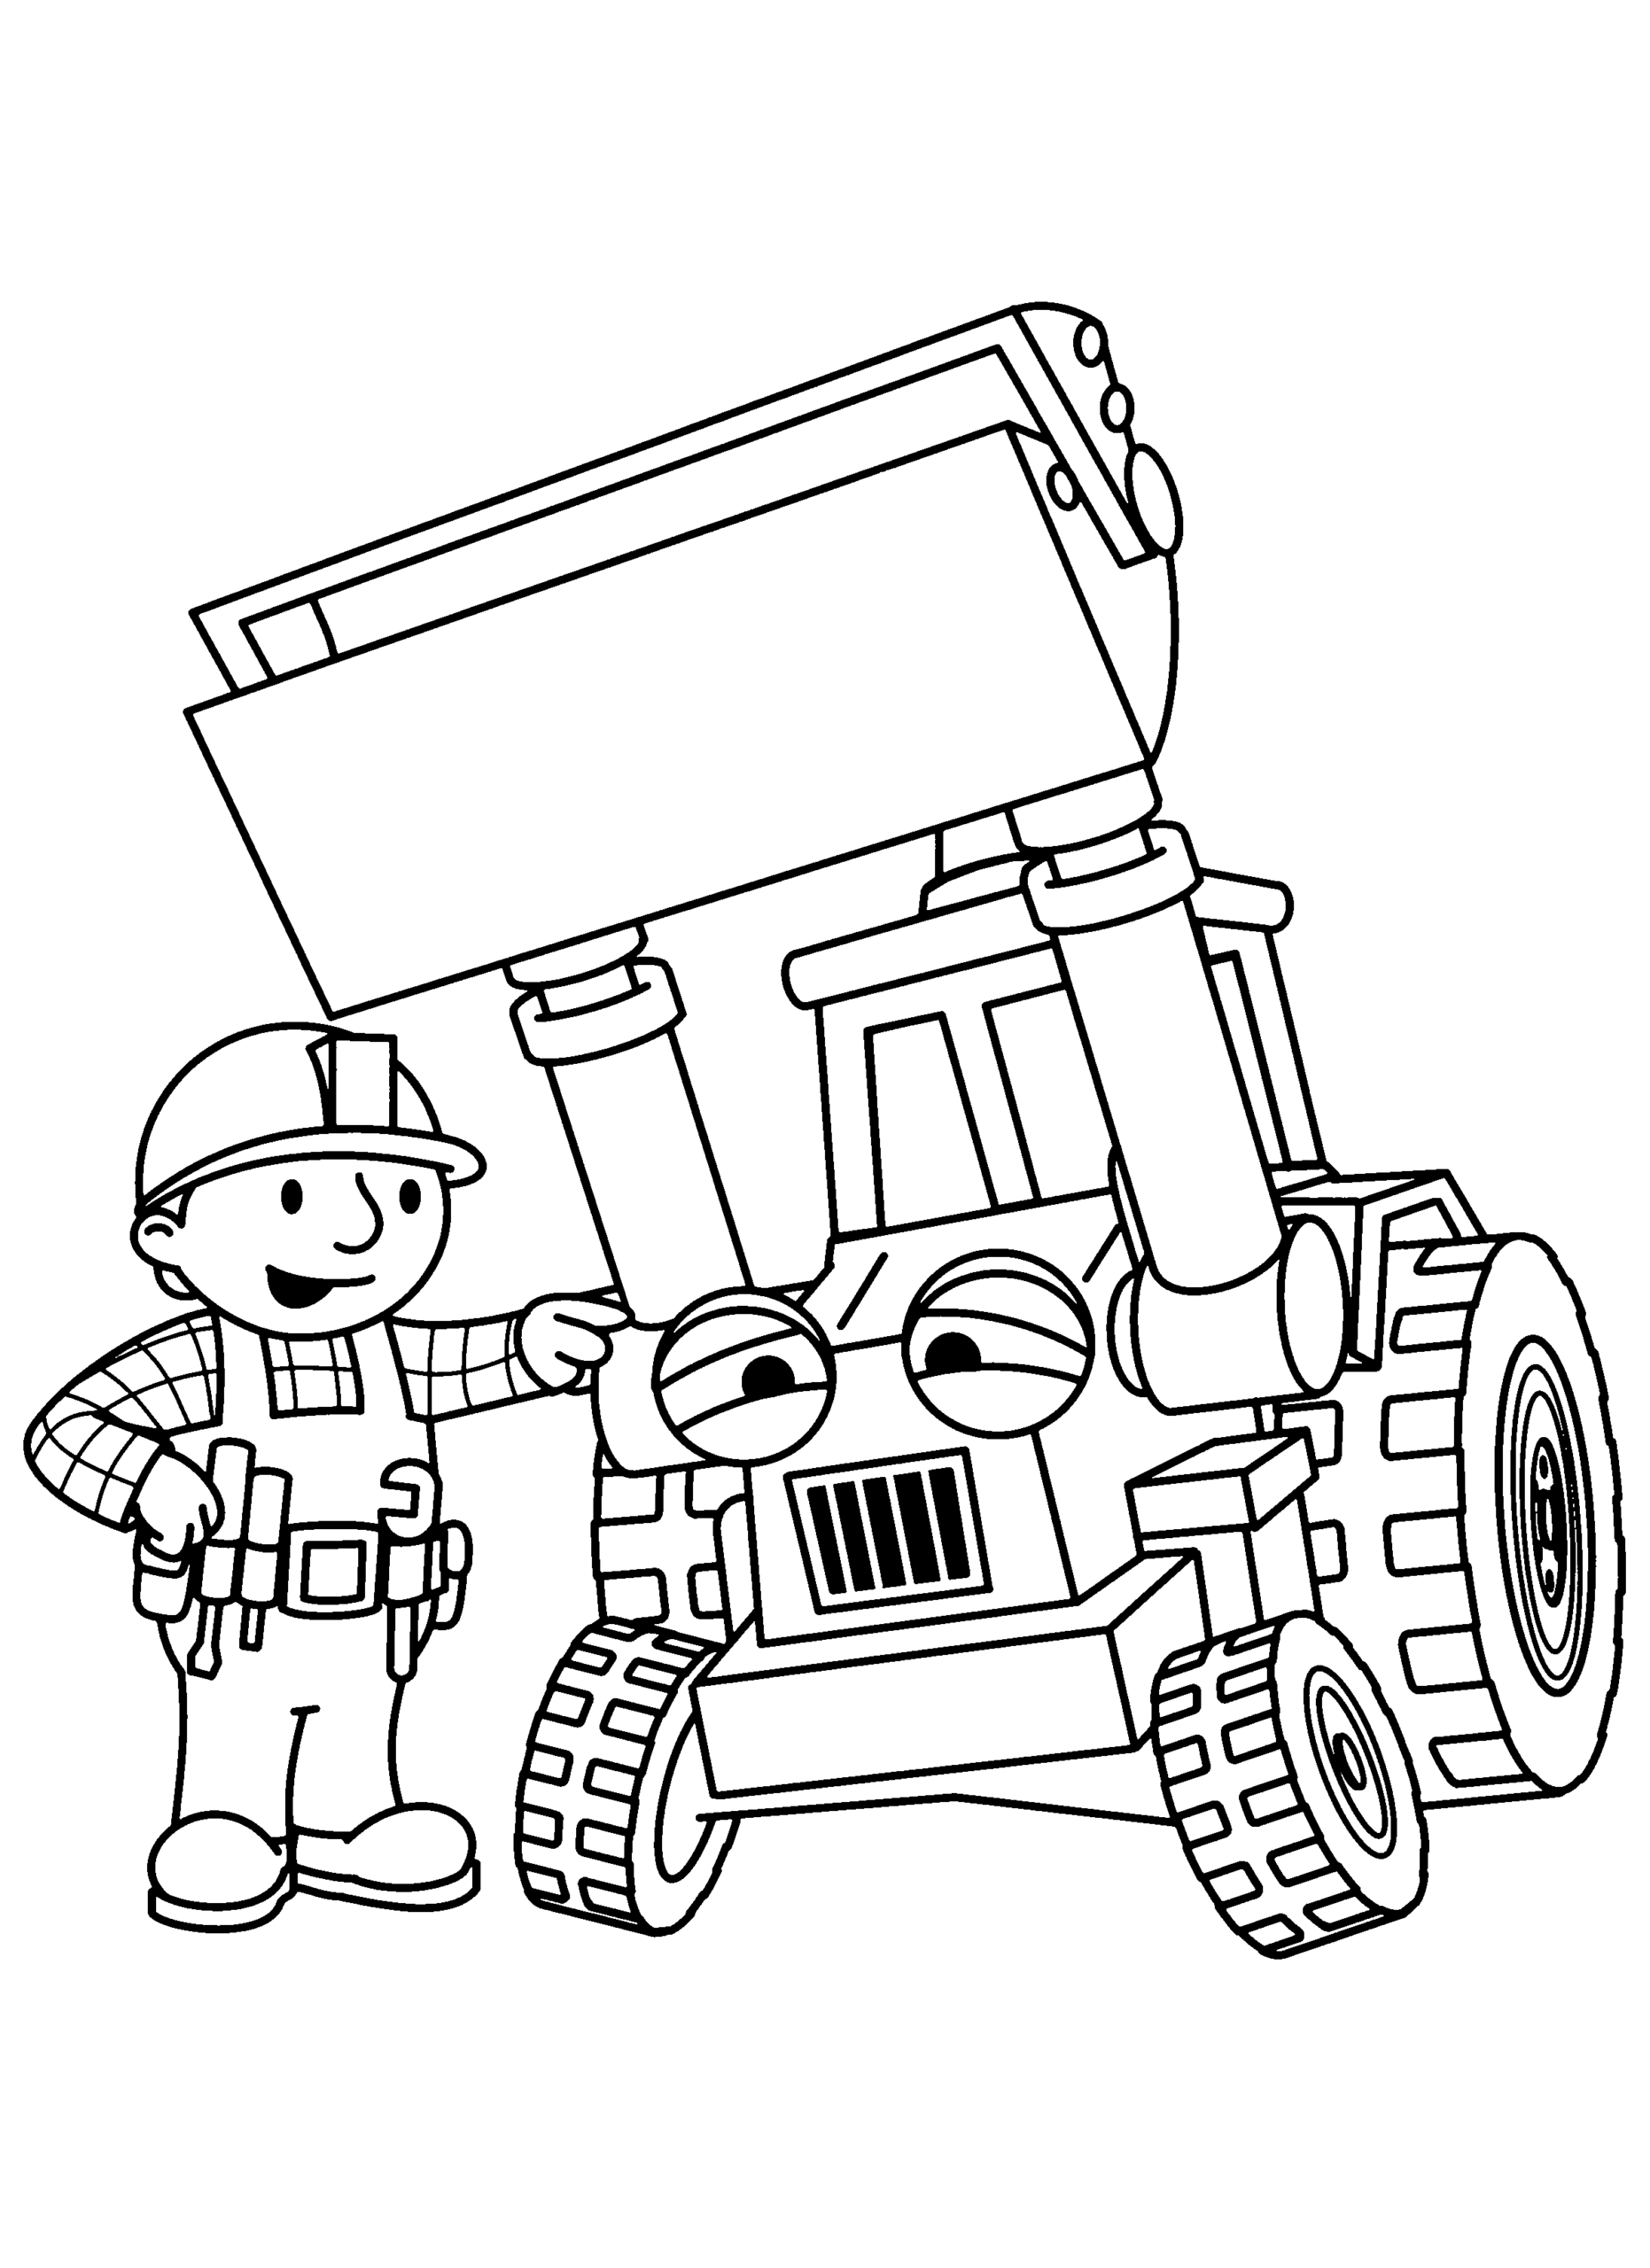 Bob the Builder Coloring Pages TV Film bob the builder 56 Printable 2020 01076 Coloring4free